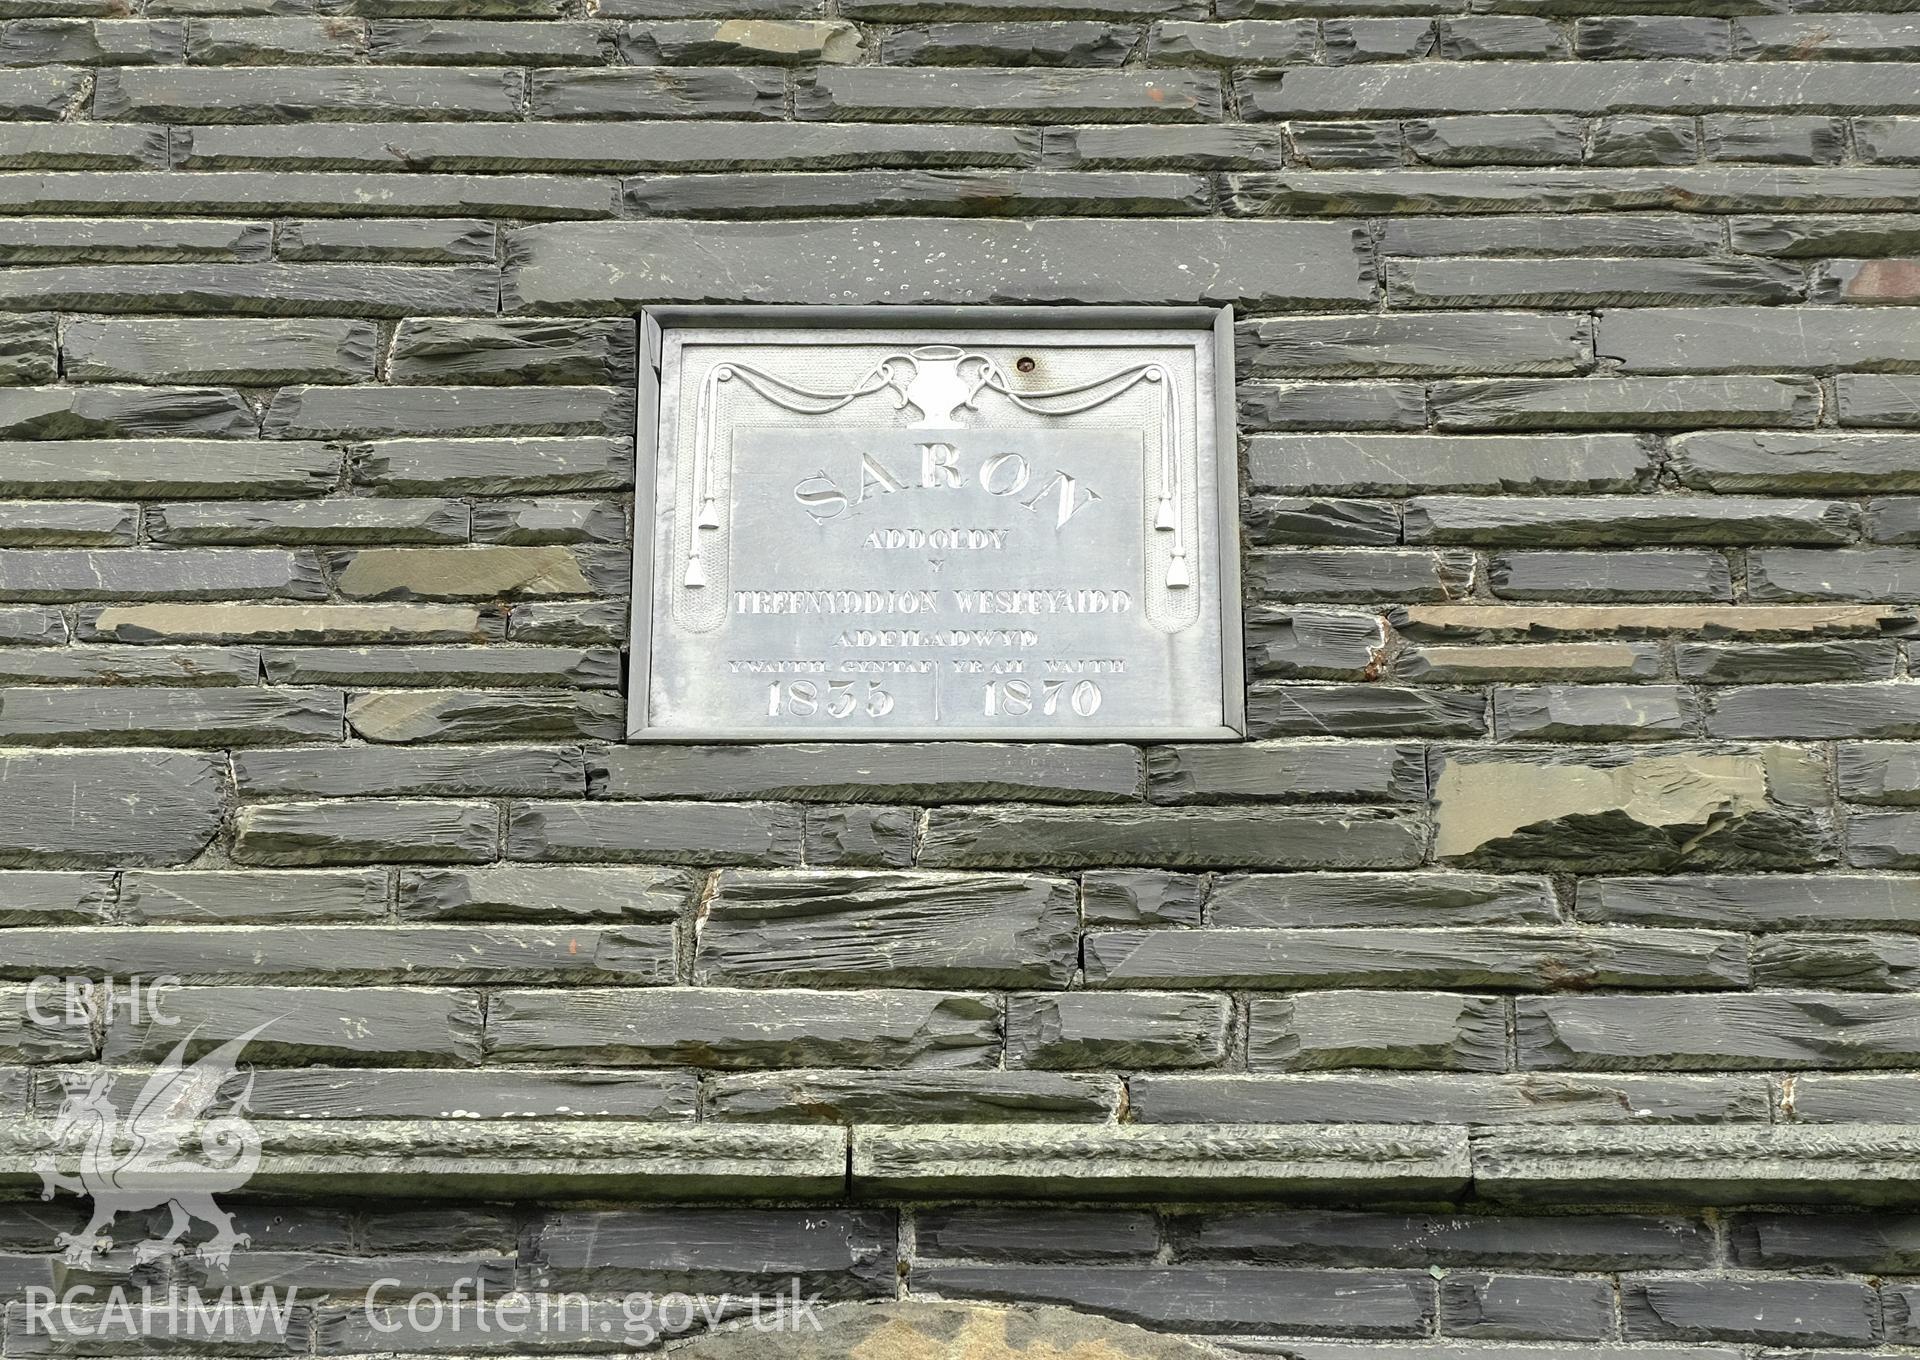 Colour photograph showing a view of date tablet on Capel Saron, Abergynolwyn's facade, produced by Richard Hayman 23rd February 2017